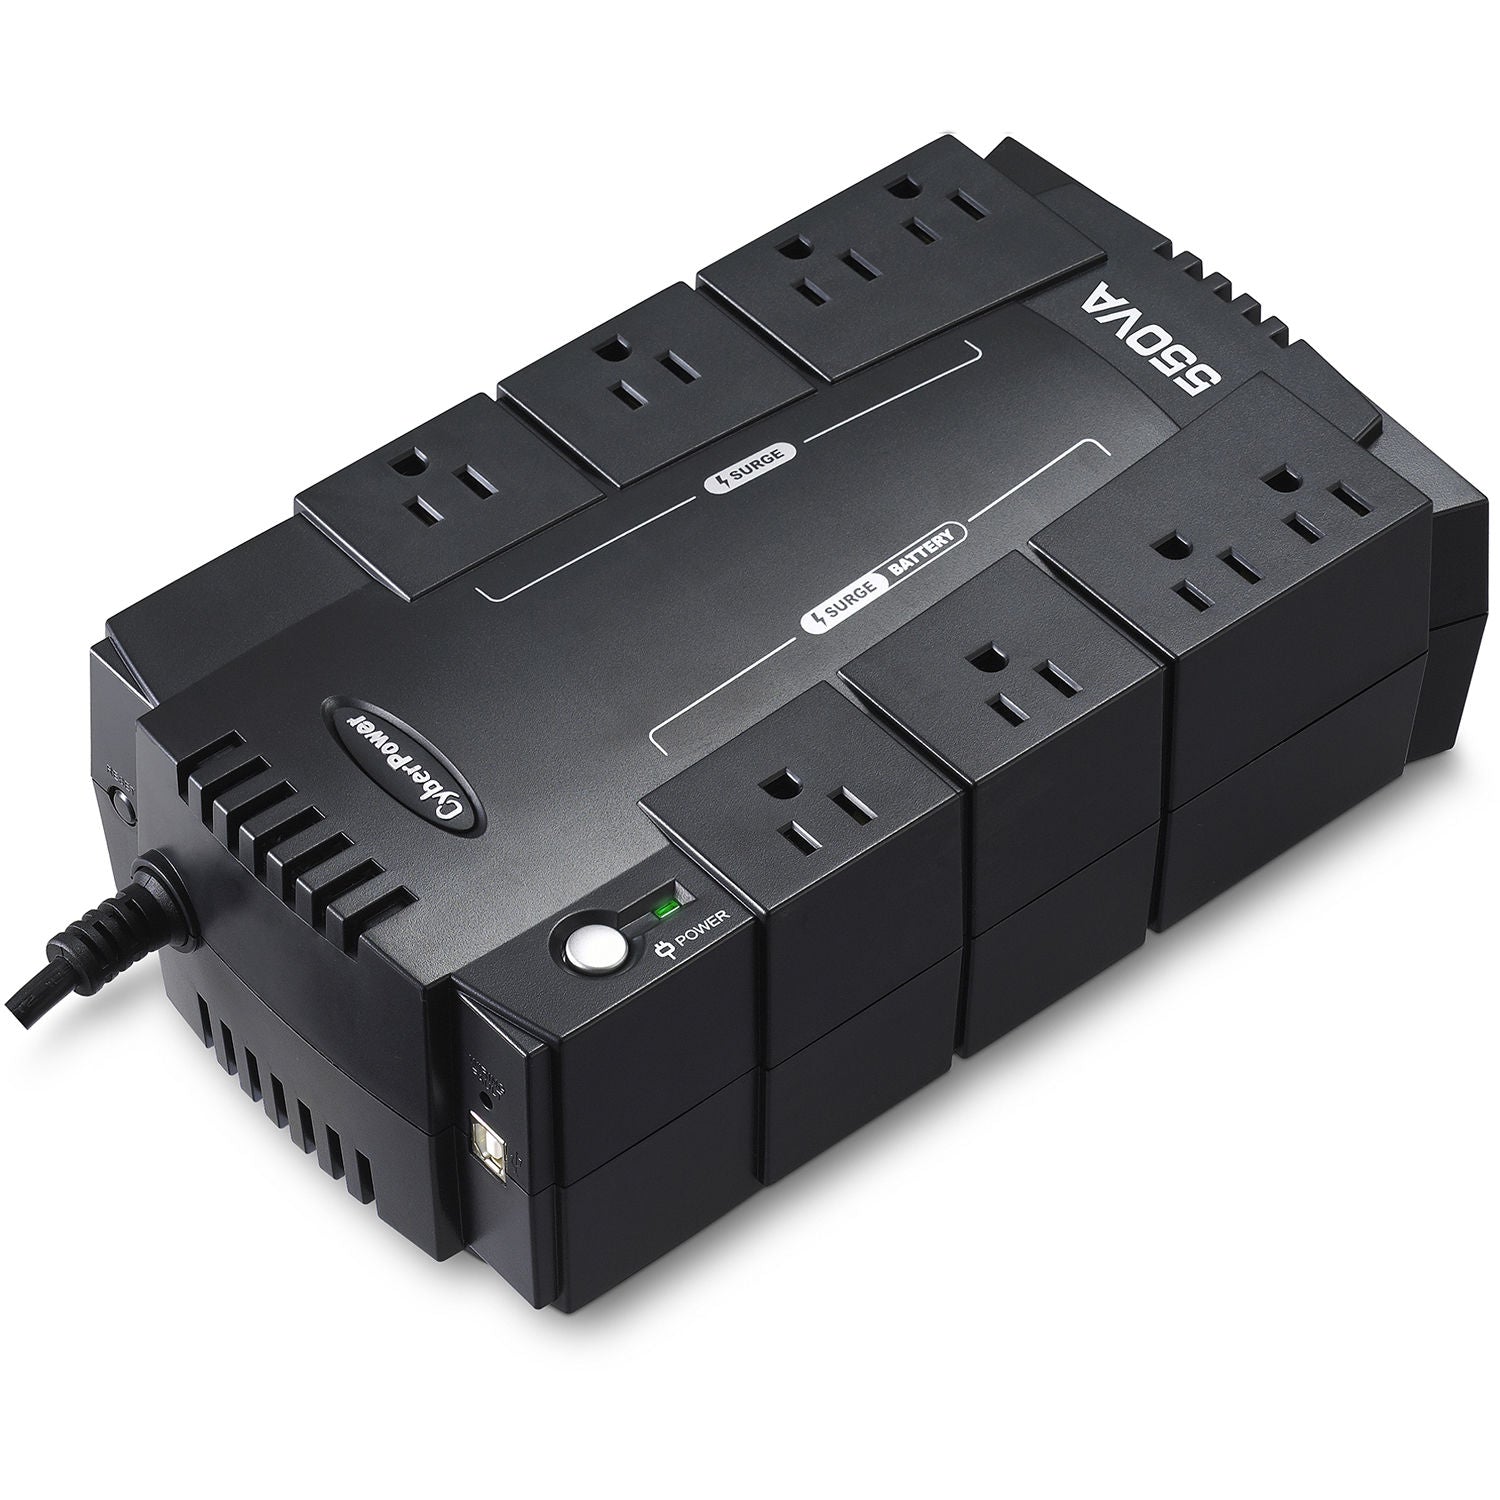 CyberPower CP550SLG-R 550VA/330W 8 Outlets Compact Standby UPS - New Battery Certified Refurbished